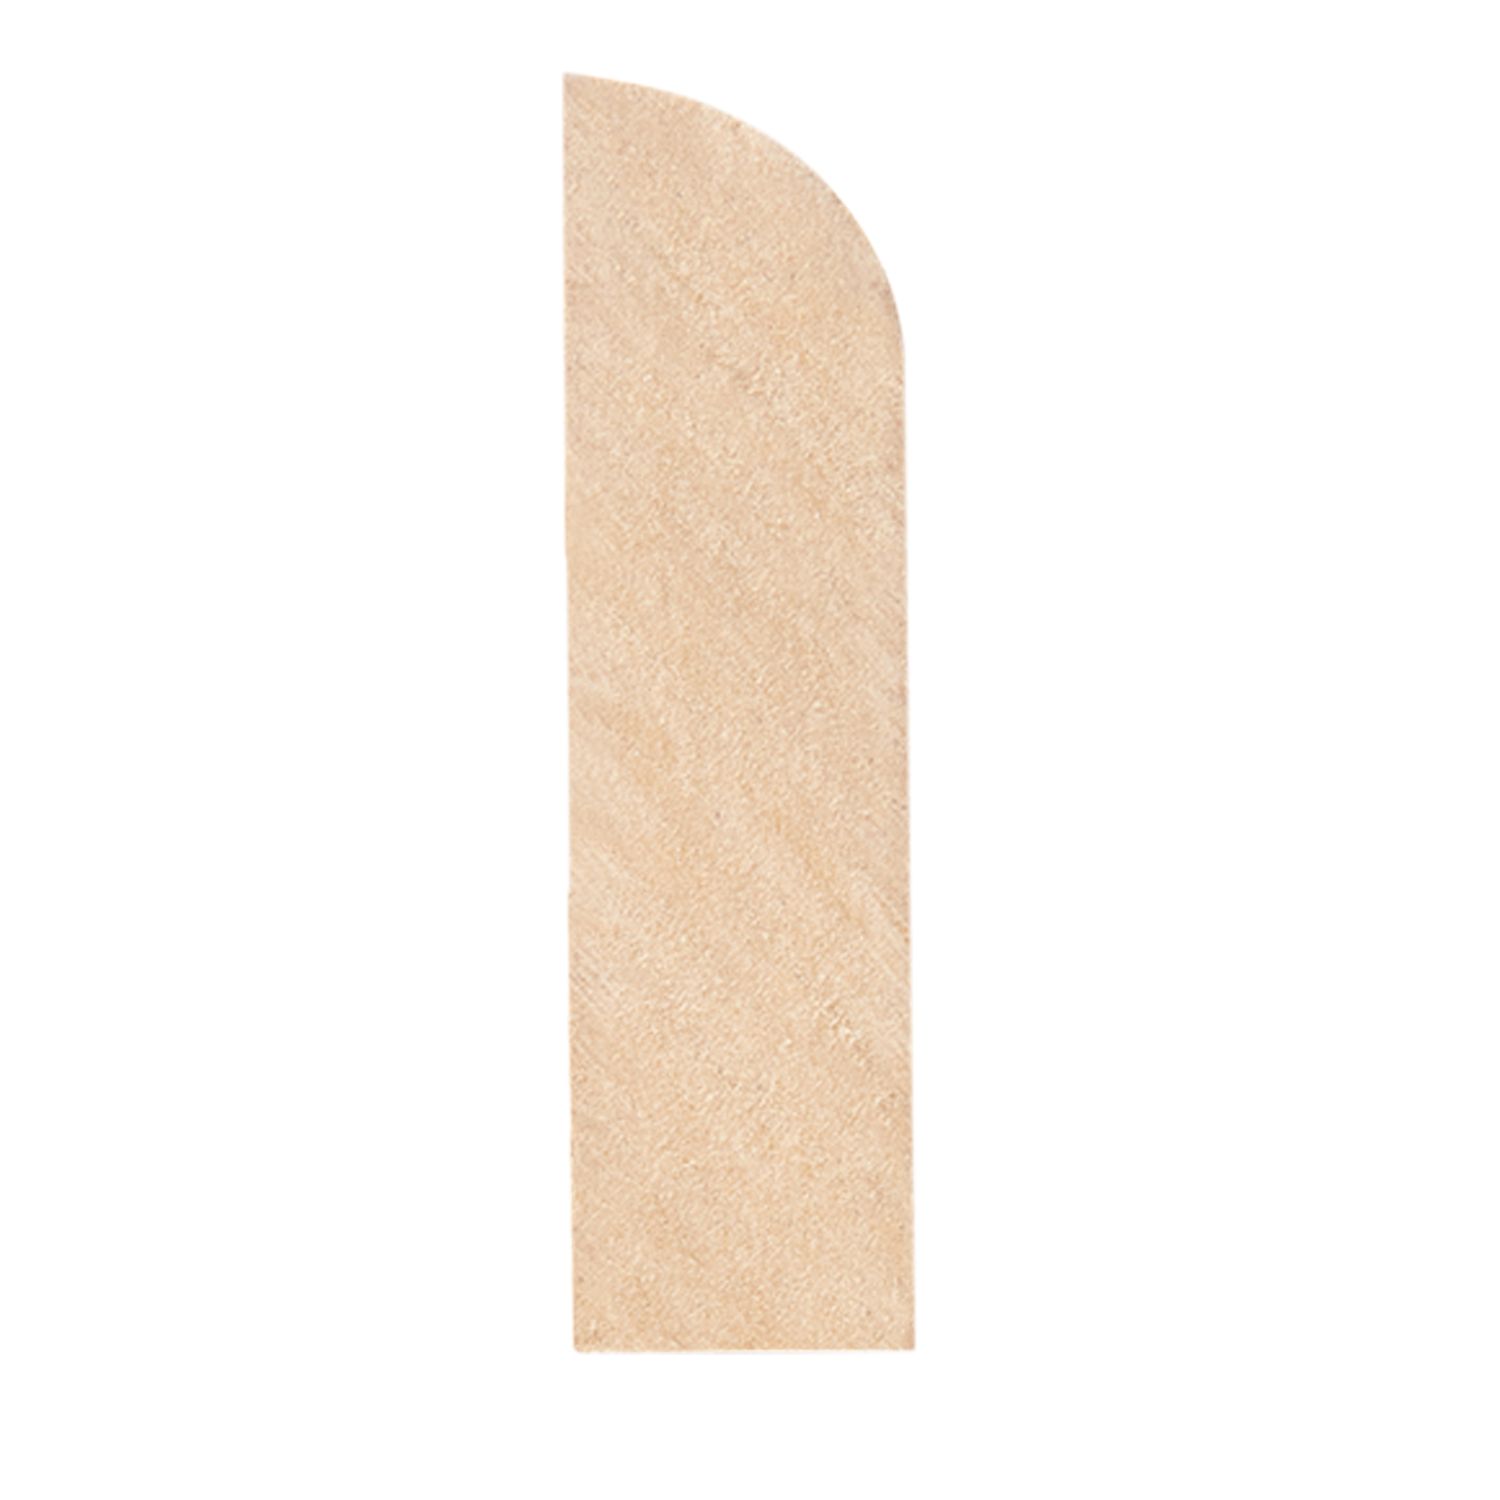 18mm MDF Architrave Bullnose 5.4m (price per lineal metre)